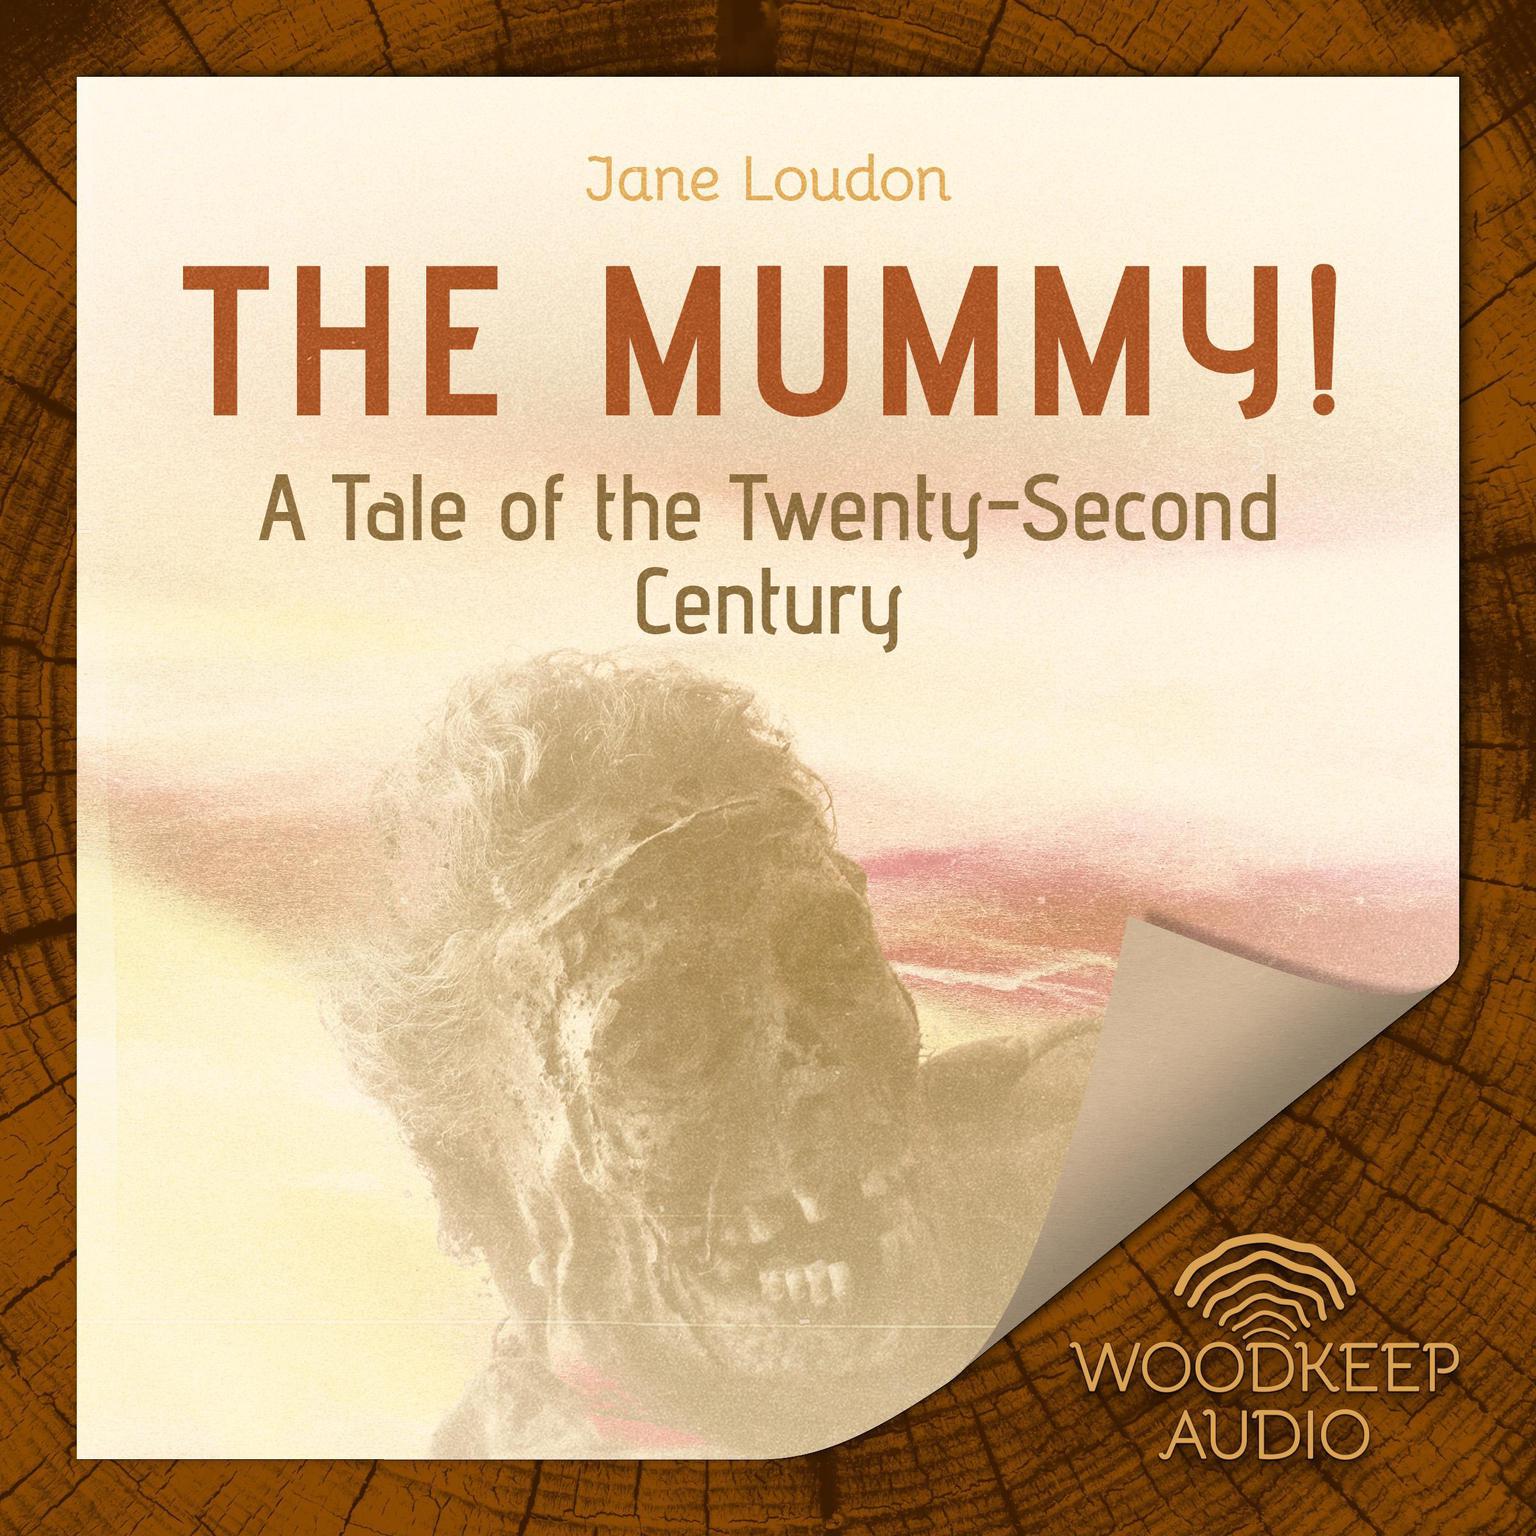 The Mummy!: A Tale of the Twenty-Second Century Audiobook, by Jane Loudon